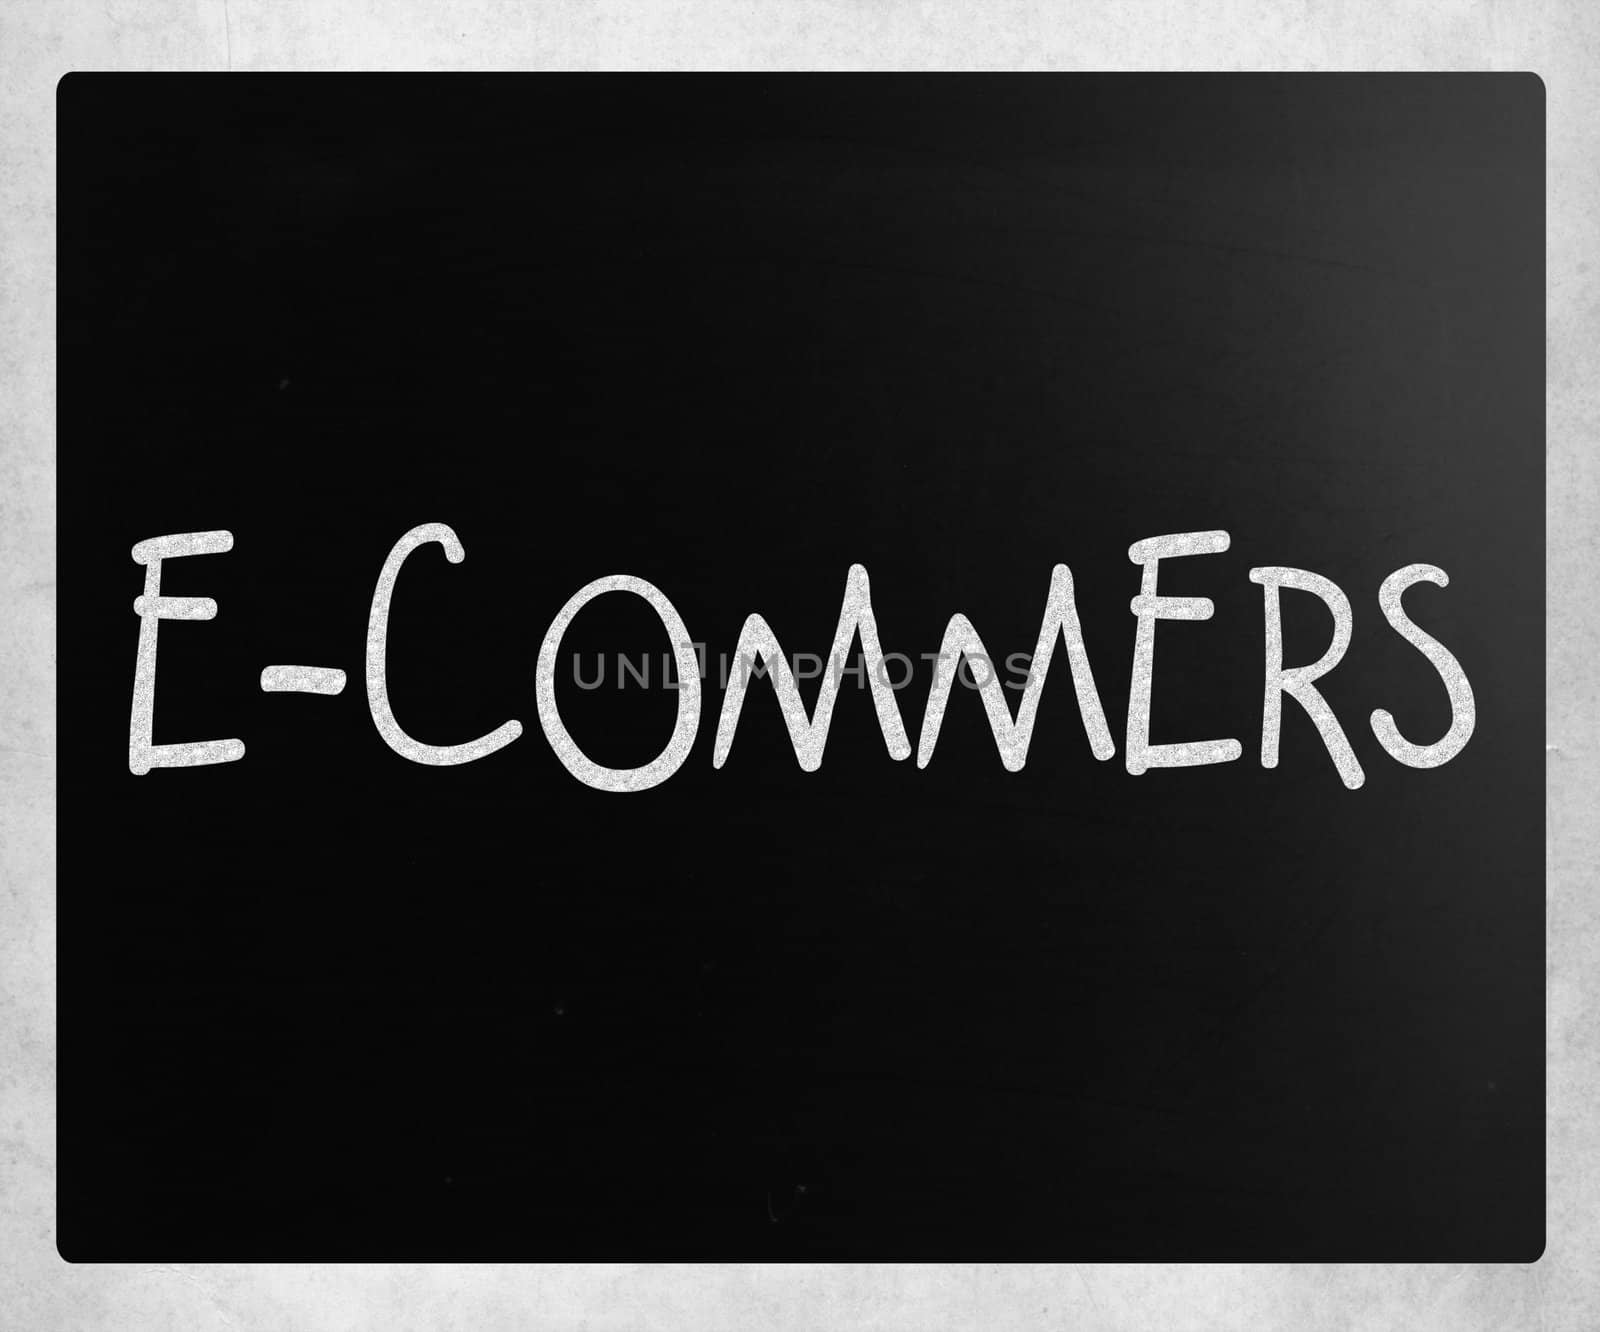 The word "E-commers" handwritten with white chalk on a blackboard